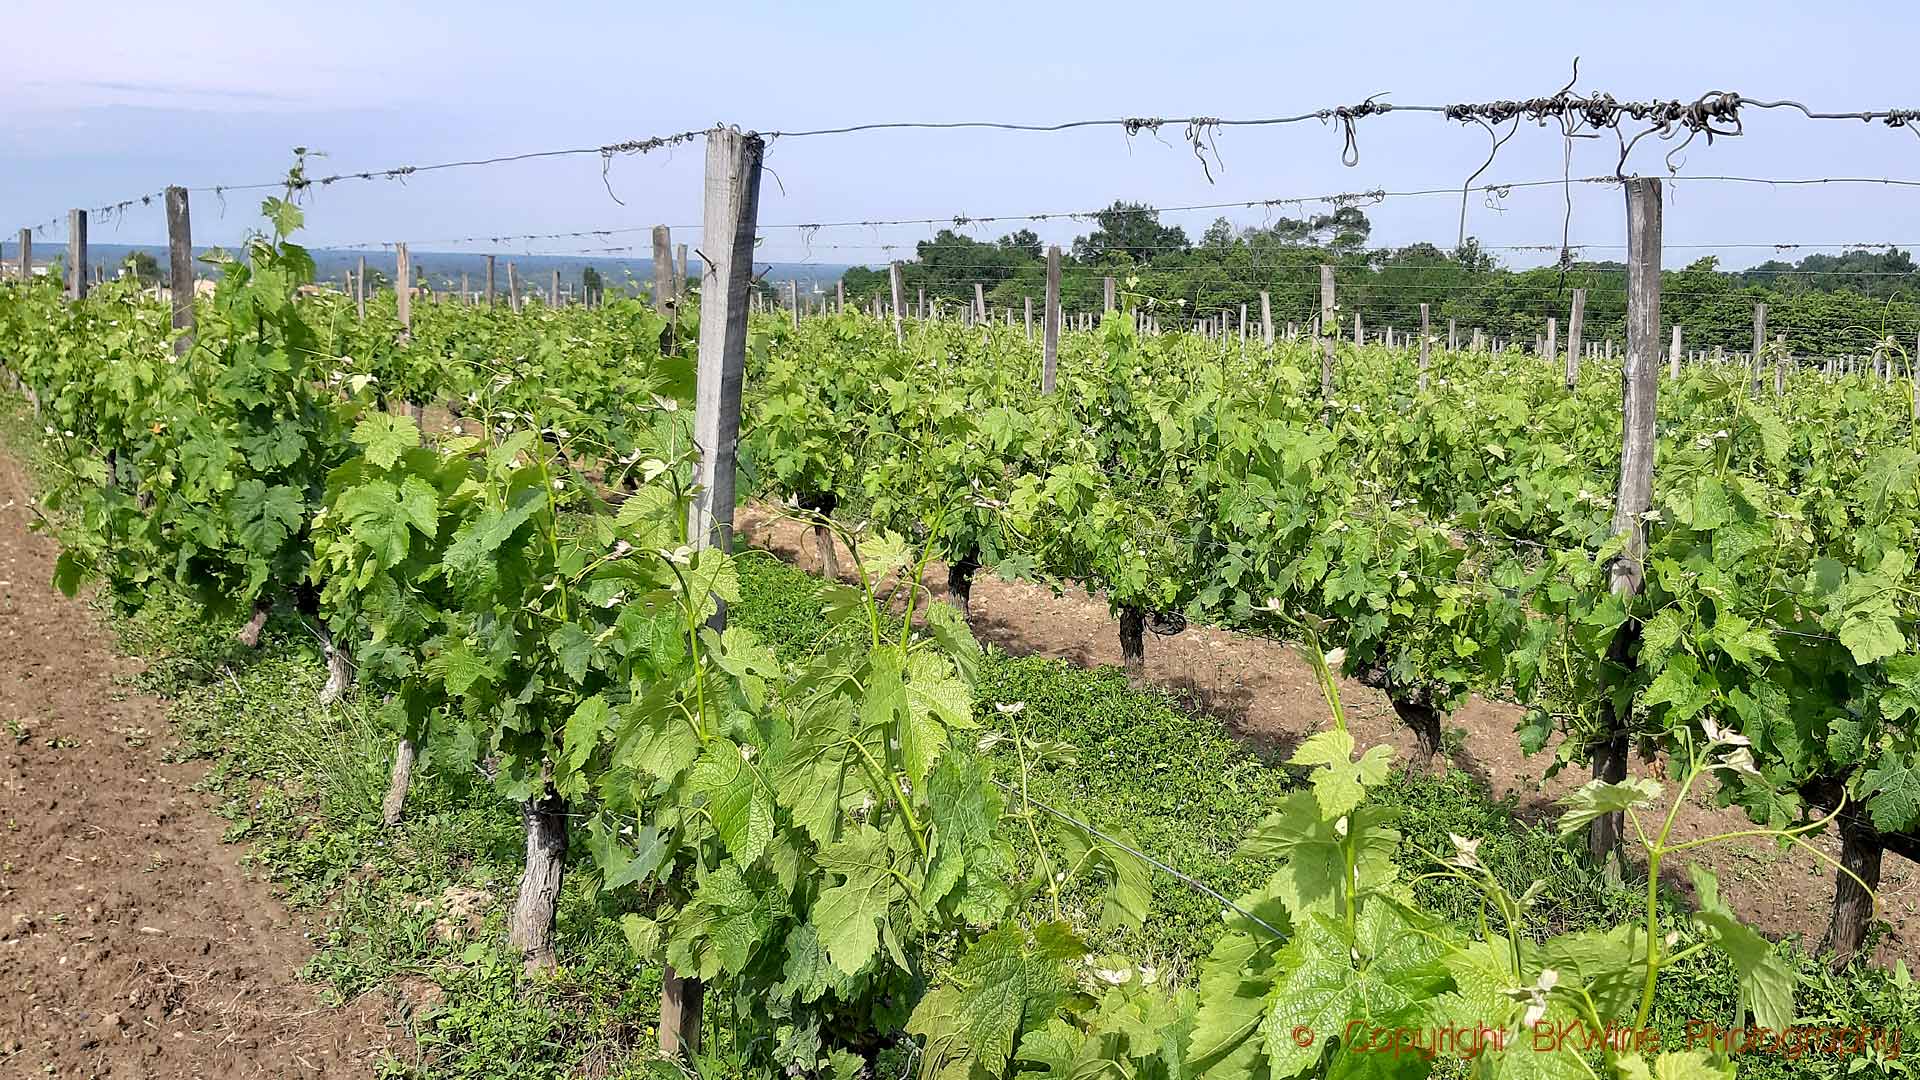 The vineyards in springtime at Chateau Carsin, Bordeaux